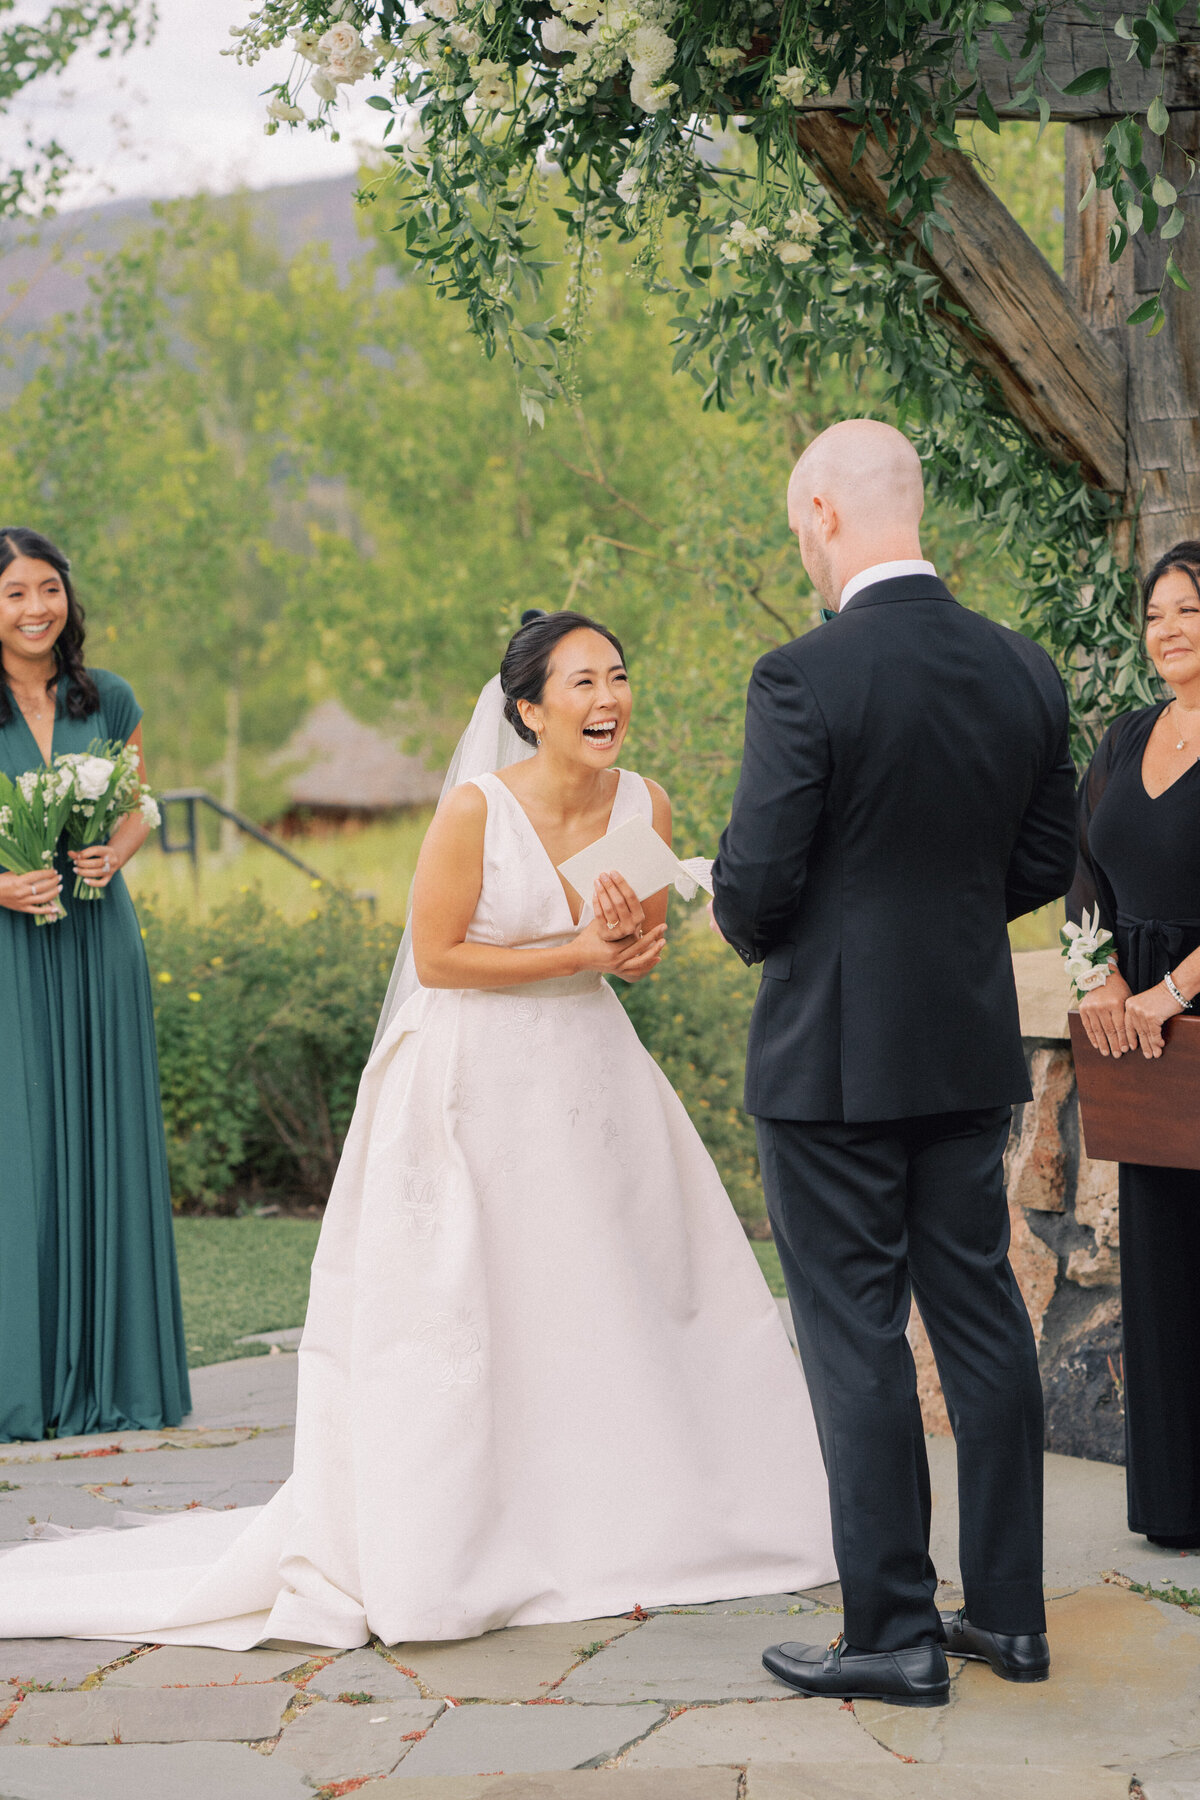 Laughs during the ceremony at Colorado wedding